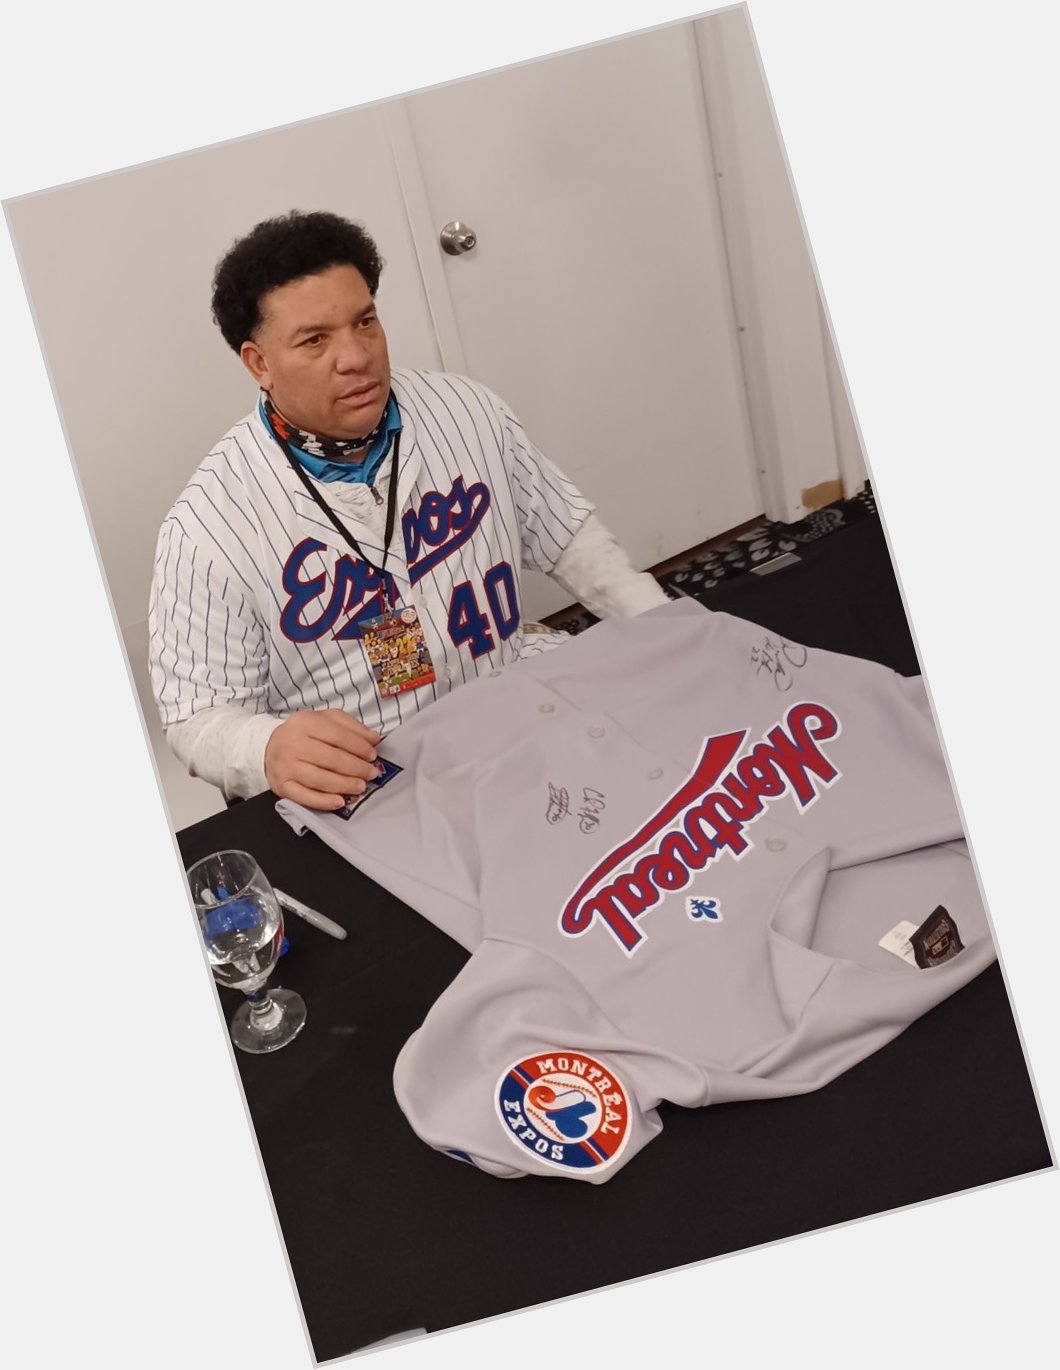 Happy birthday today to Bartolo Colon. This is a shot I took of him at several years ago. 